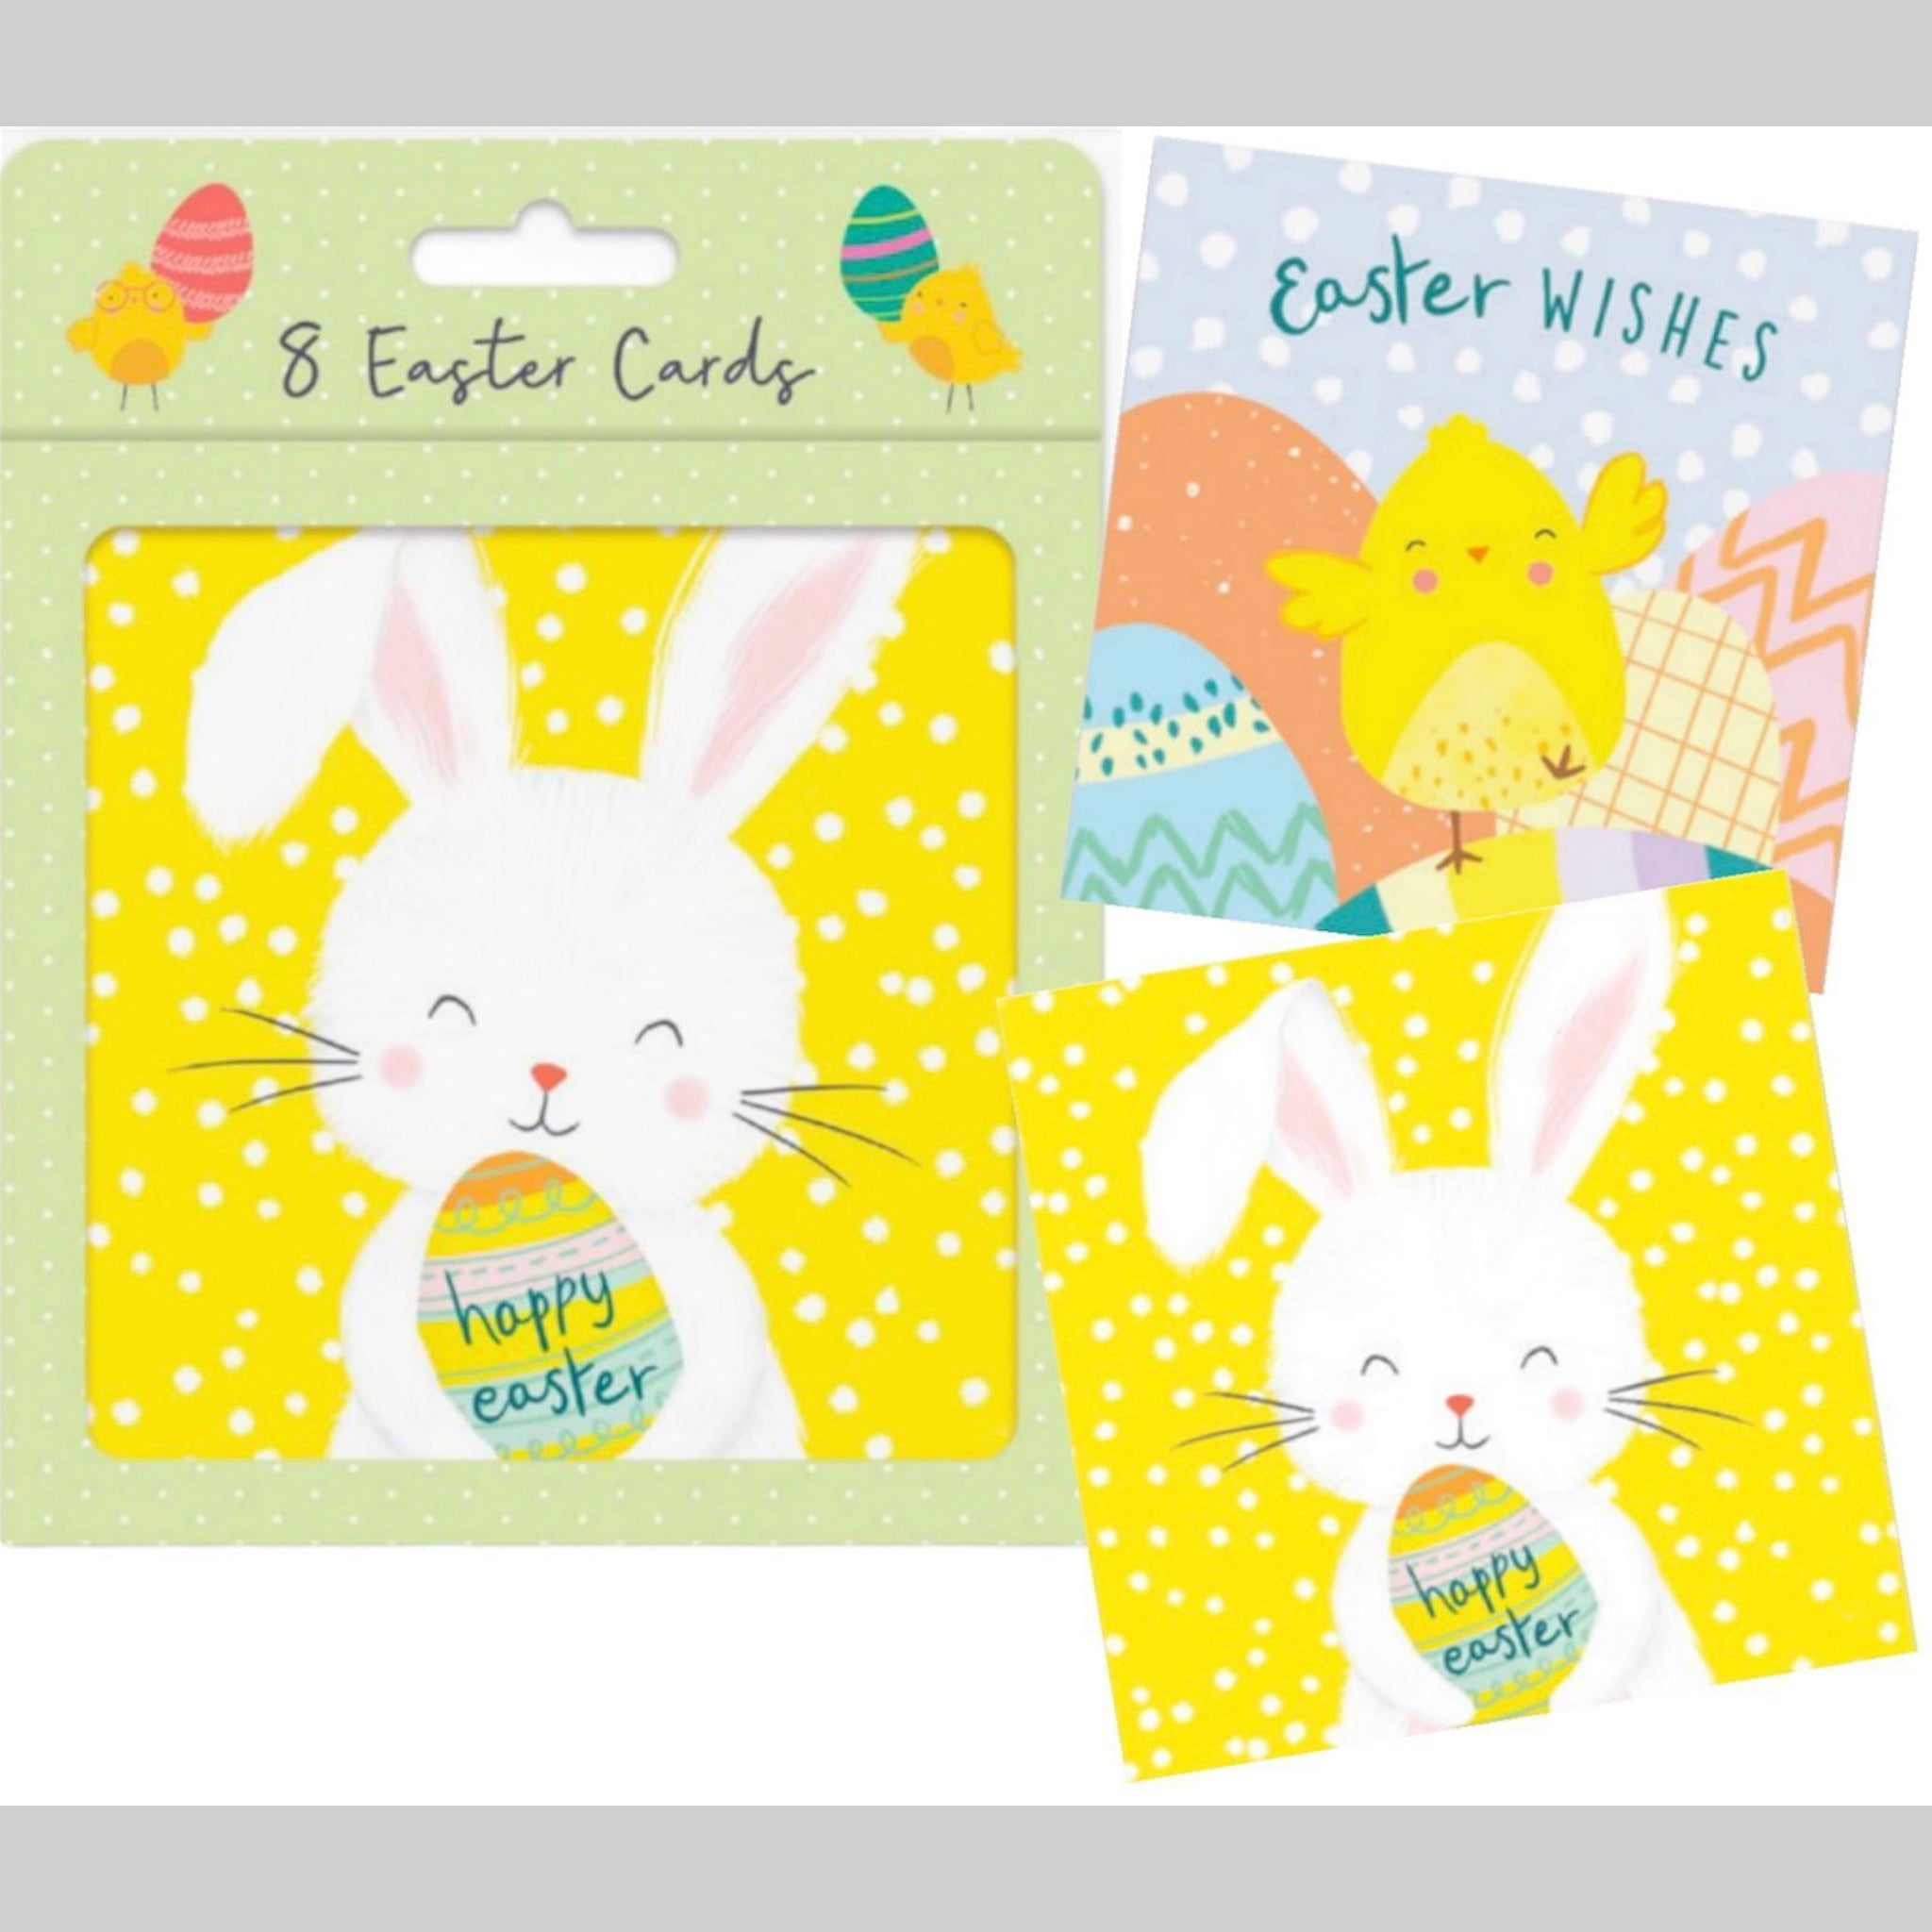 Beclen Harp Pack Of 8 Traditional Luxury Easter Multiple Print Cards With Envelopes-Perfect Greeting Cards For Easter